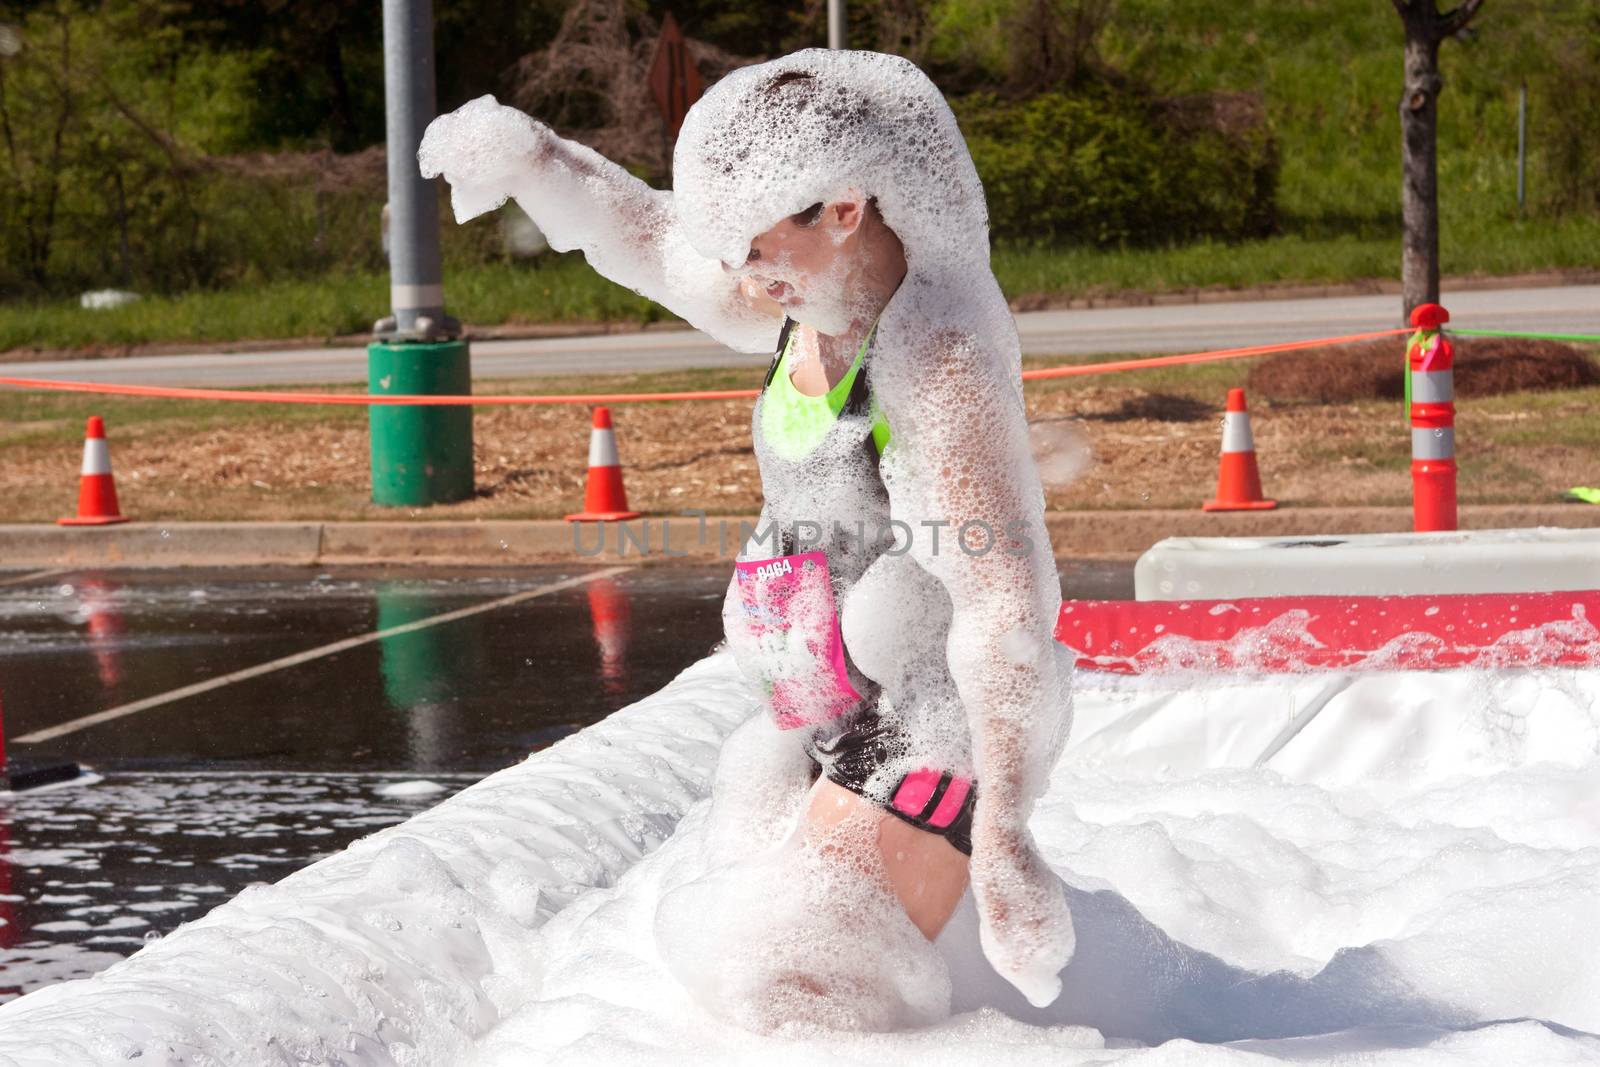 Woman Covered In Foam At Crazy Obstacle Course Race by BluIz60